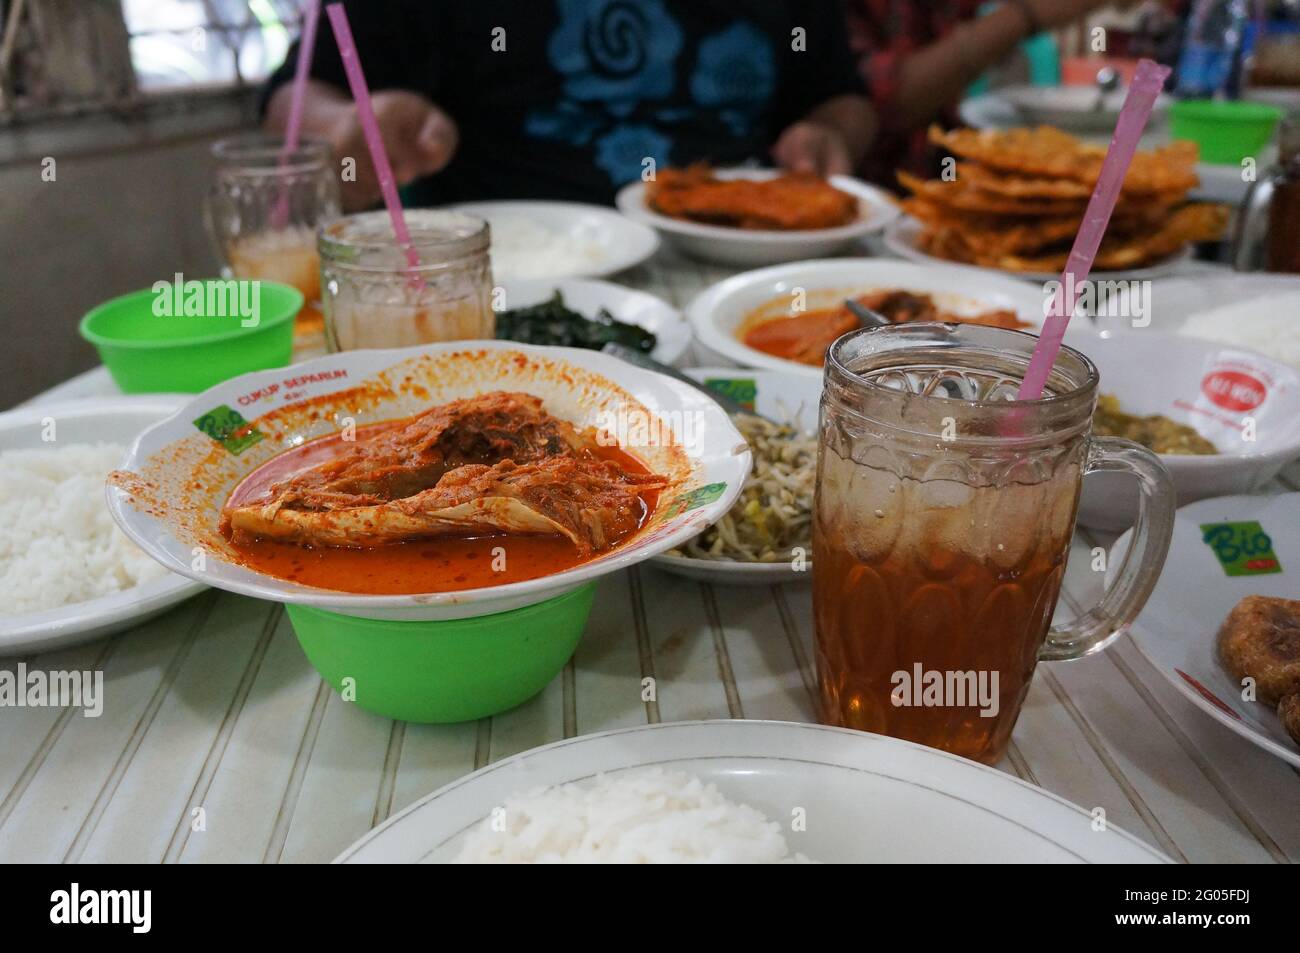 A plate of fish curry or known as gulai ikan at Warung Mak Etek Pontianak, Indonesia Stock Photo